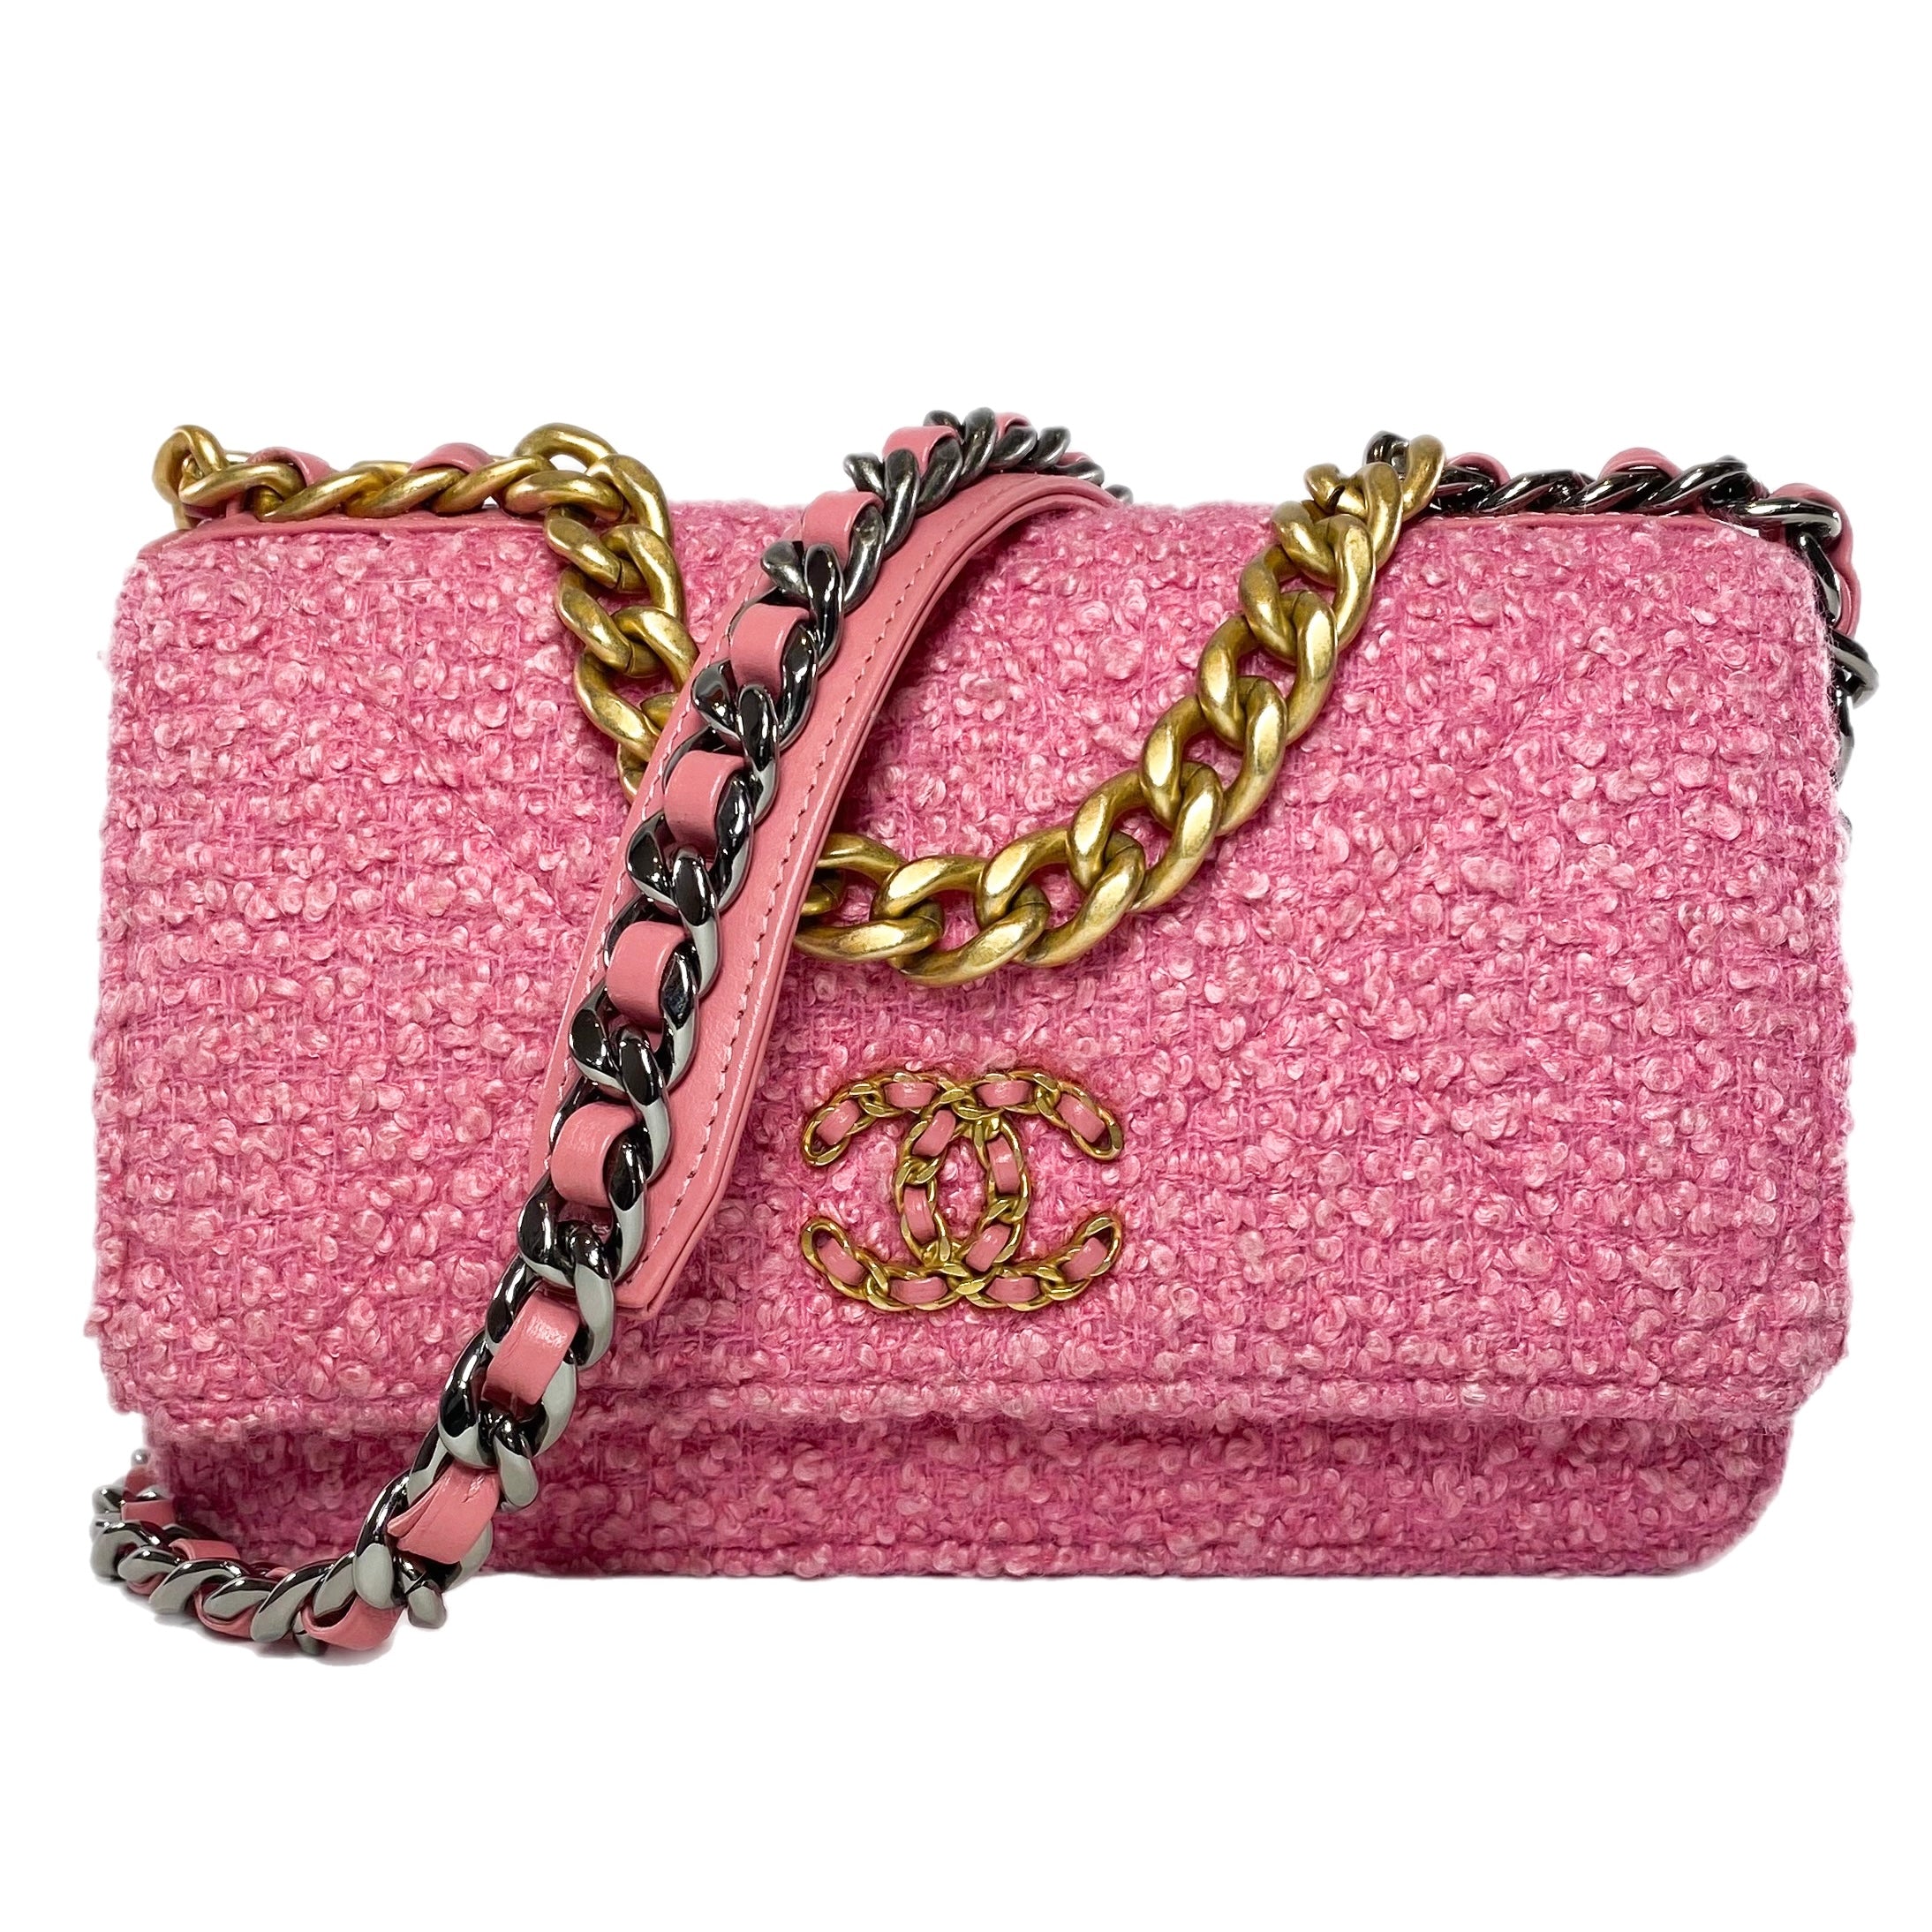 CHANEL Sequin Chanel 19 Round Clutch With Chain Coral | FASHIONPHILE